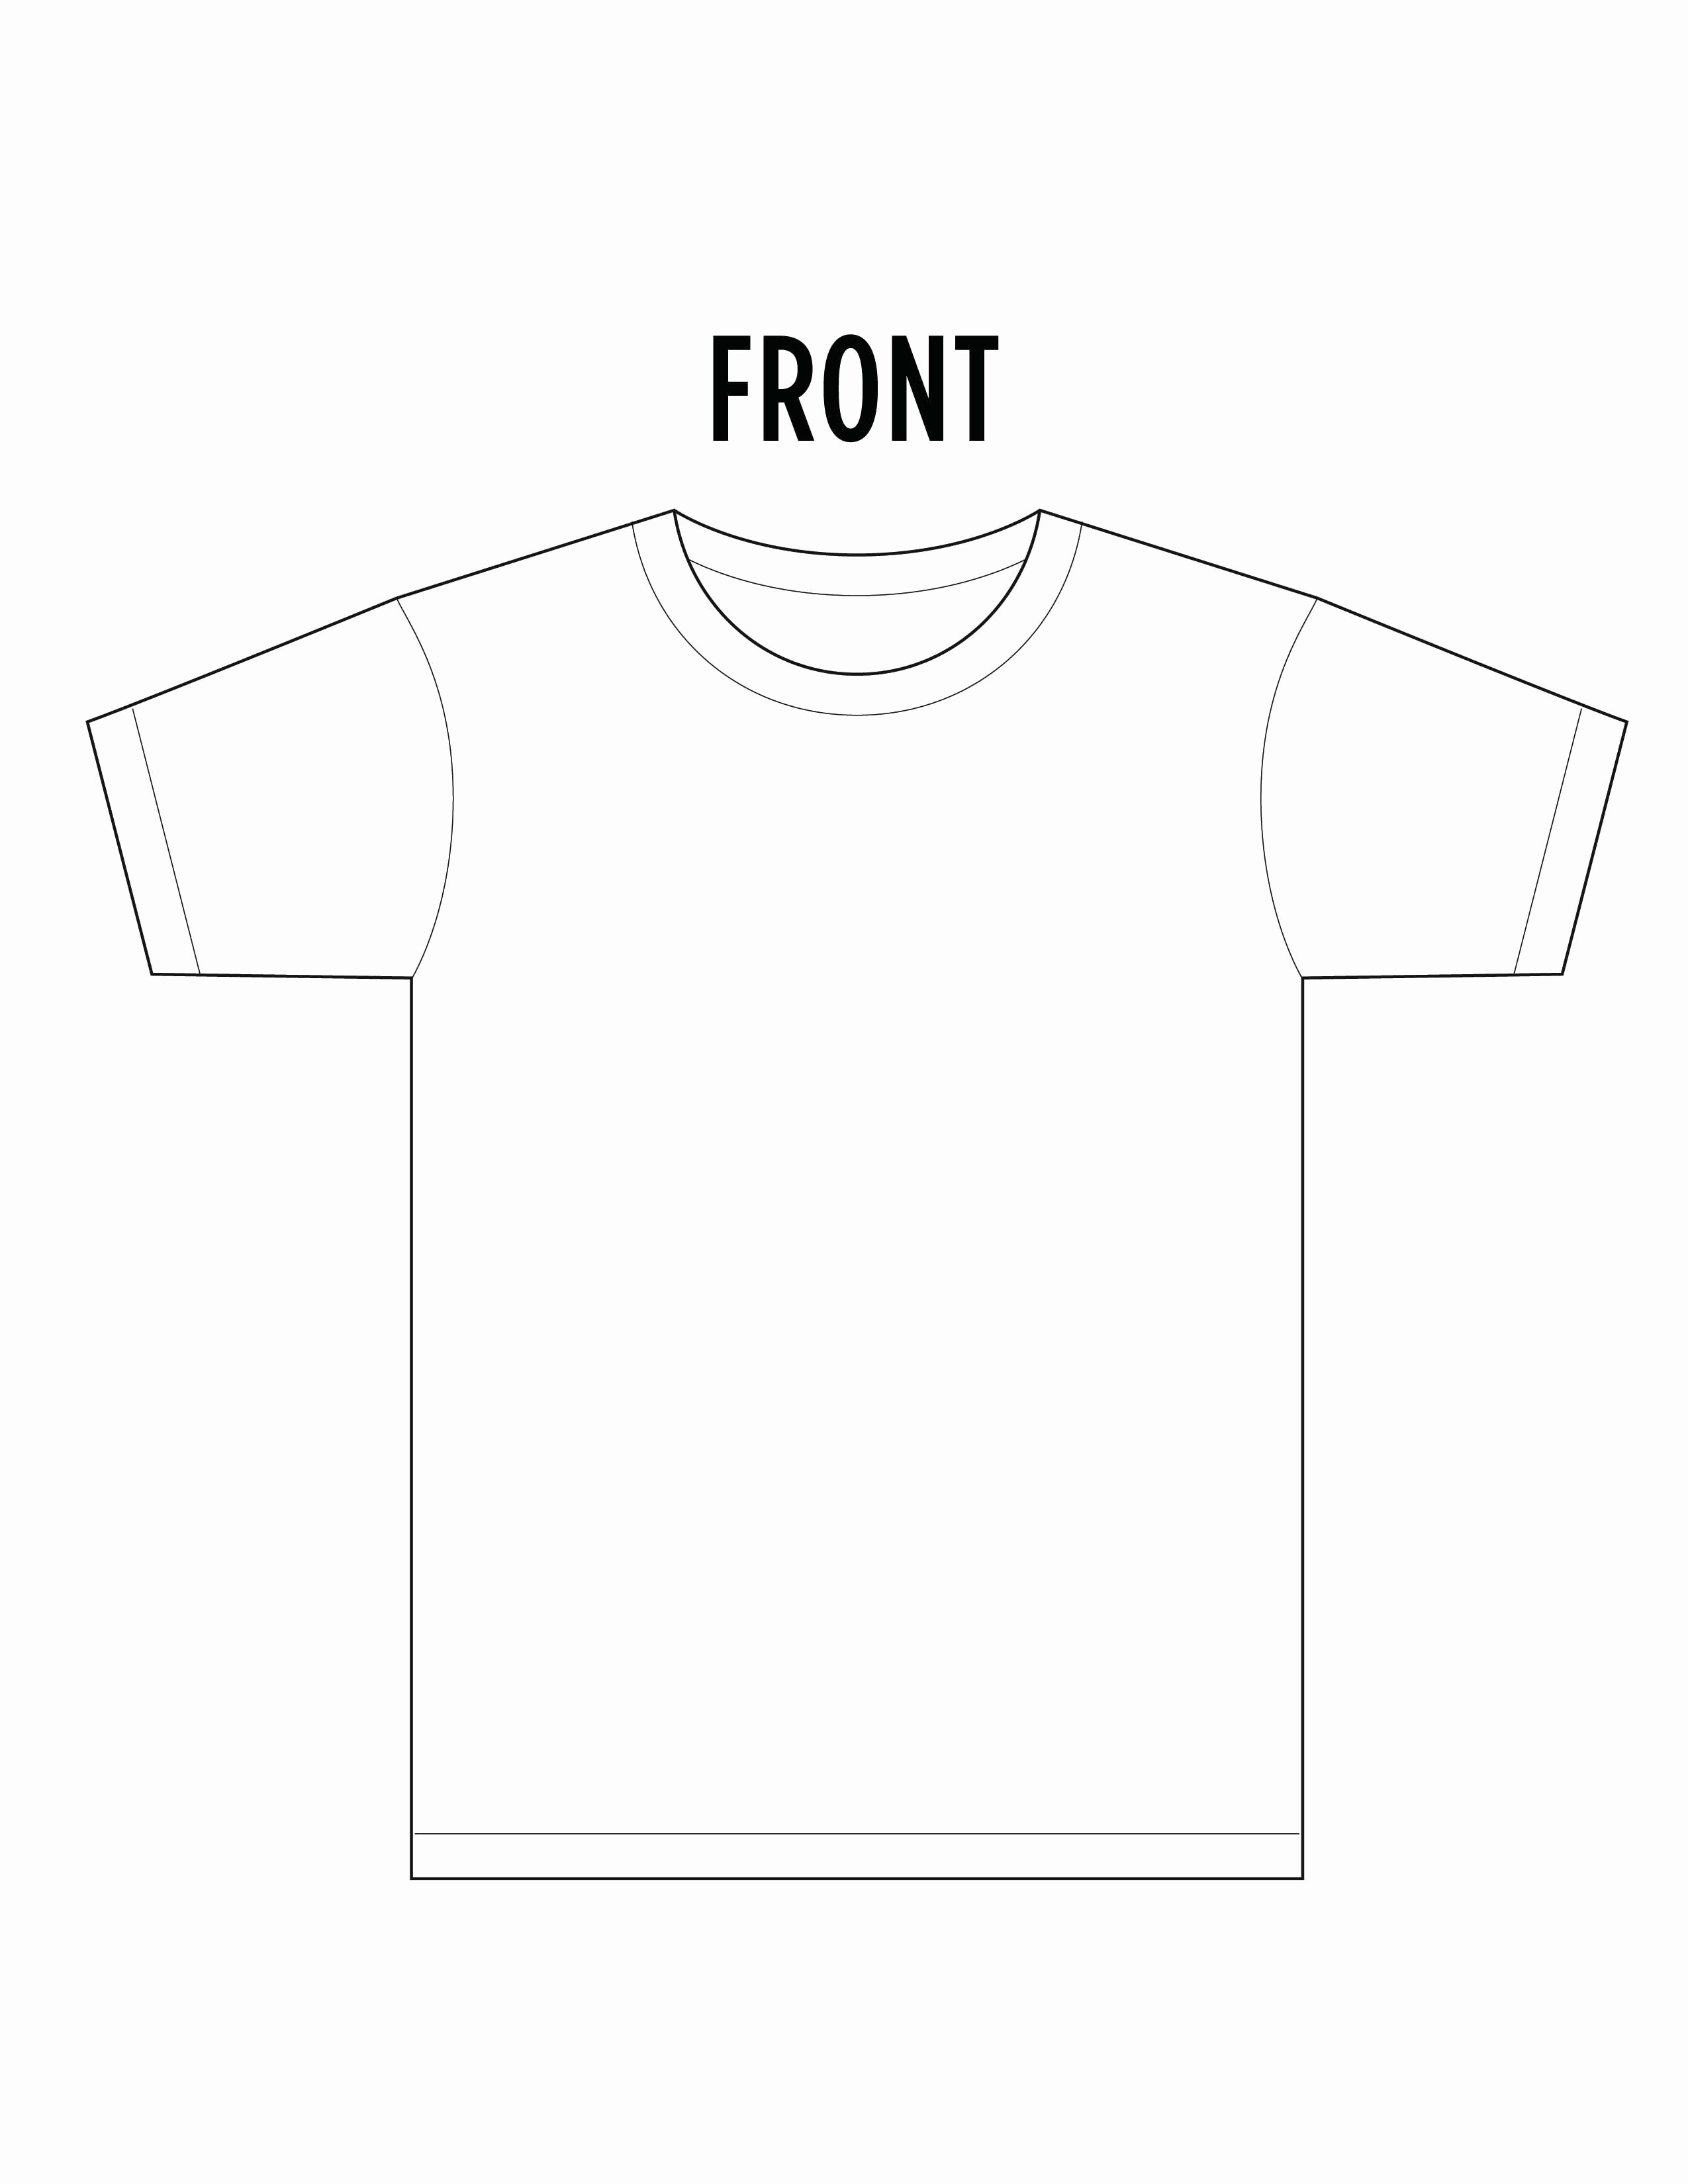 11 T Shirt Template Front and Back T Shirt